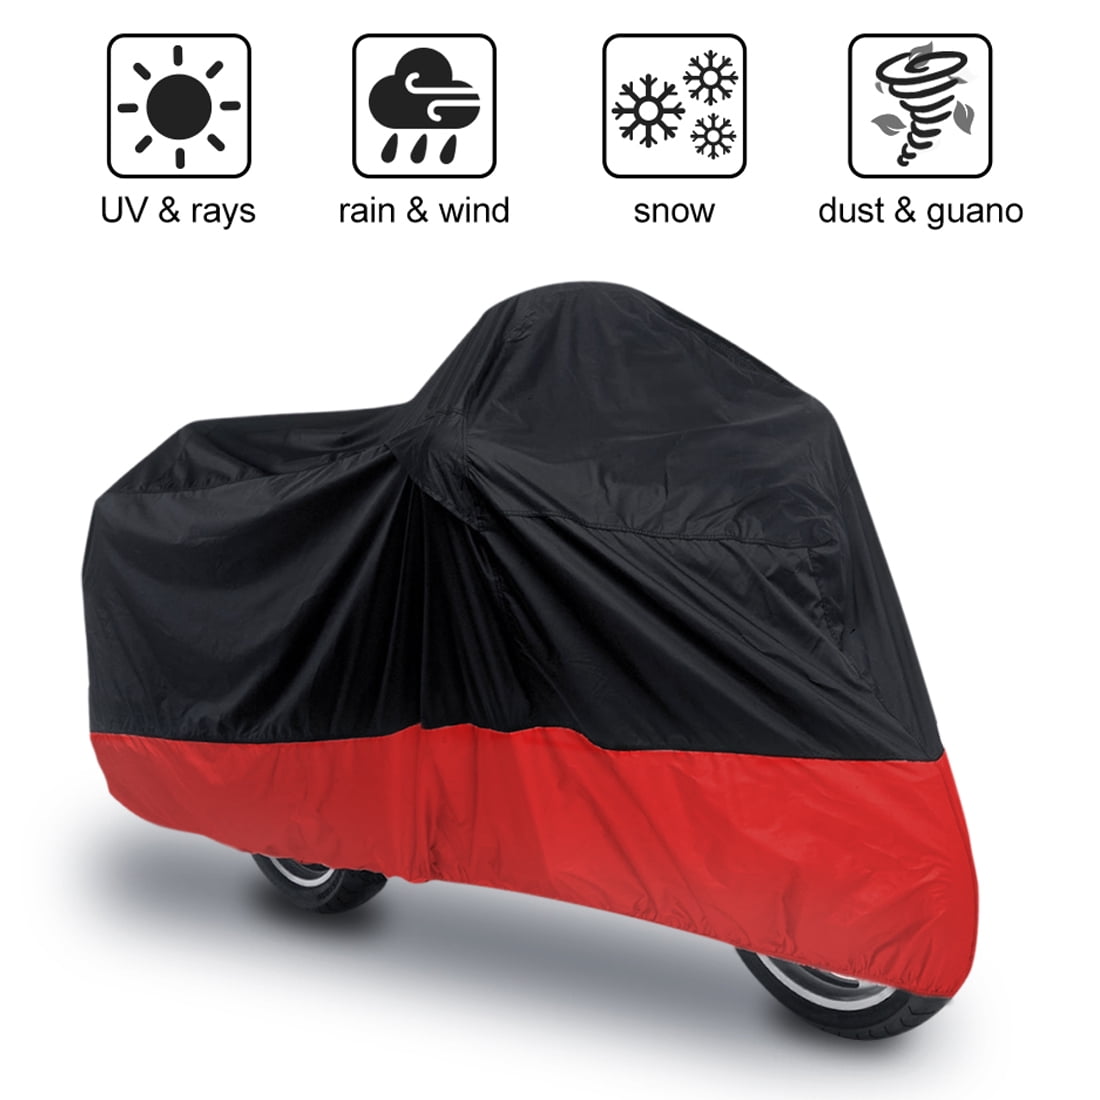 RYDE WATERPROOF MOTORBIKE/SCOOTER SADDLE SEAT RAIN COVER/PROTECTOR MOTORCYCLE 